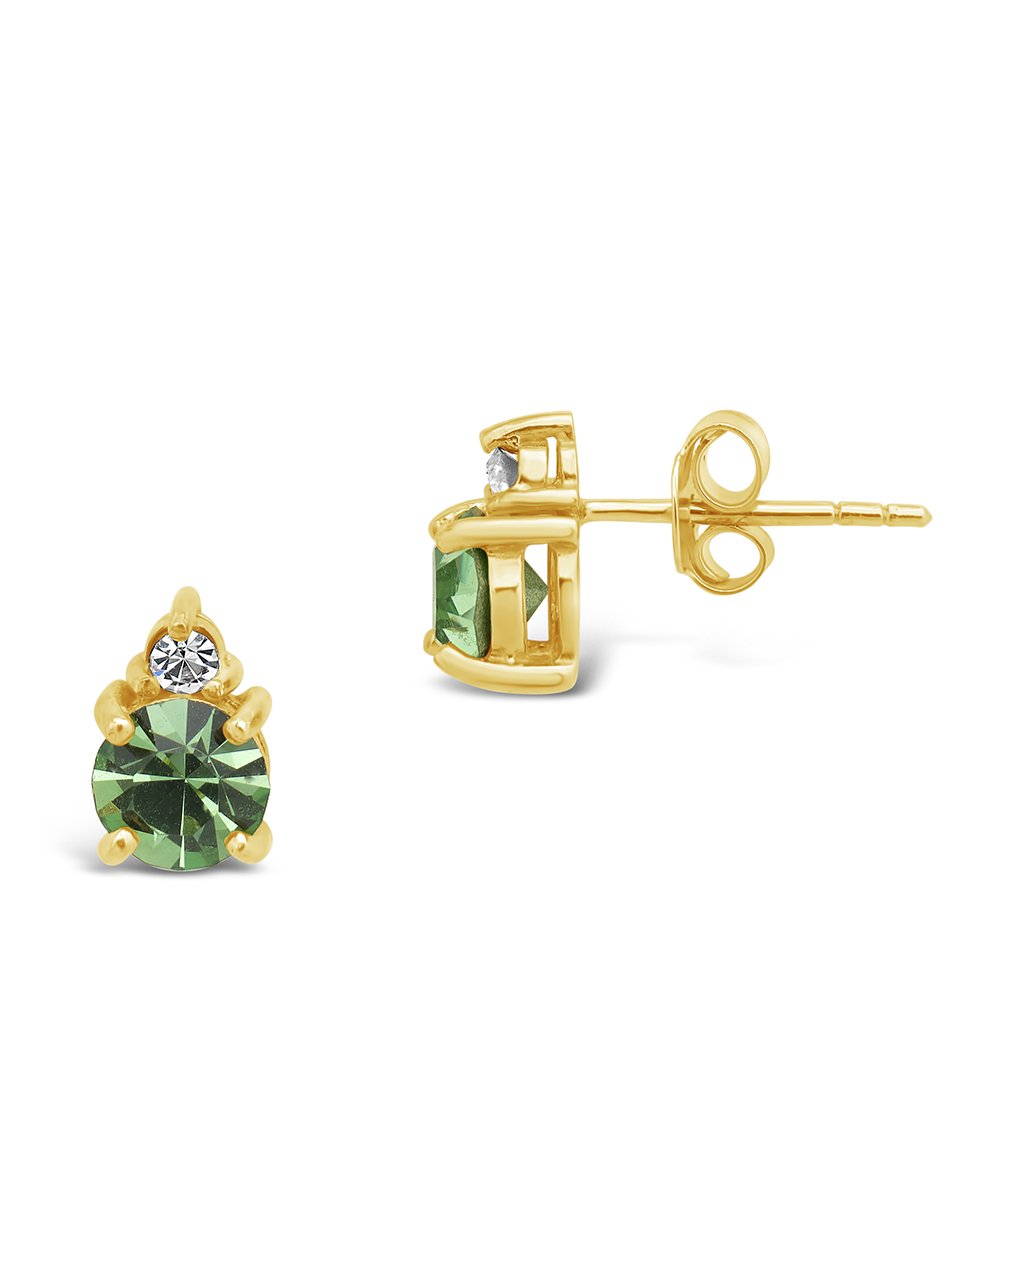 Sterling Silver Birthstone Studs Earring Sterling Forever Gold August / Peridot 